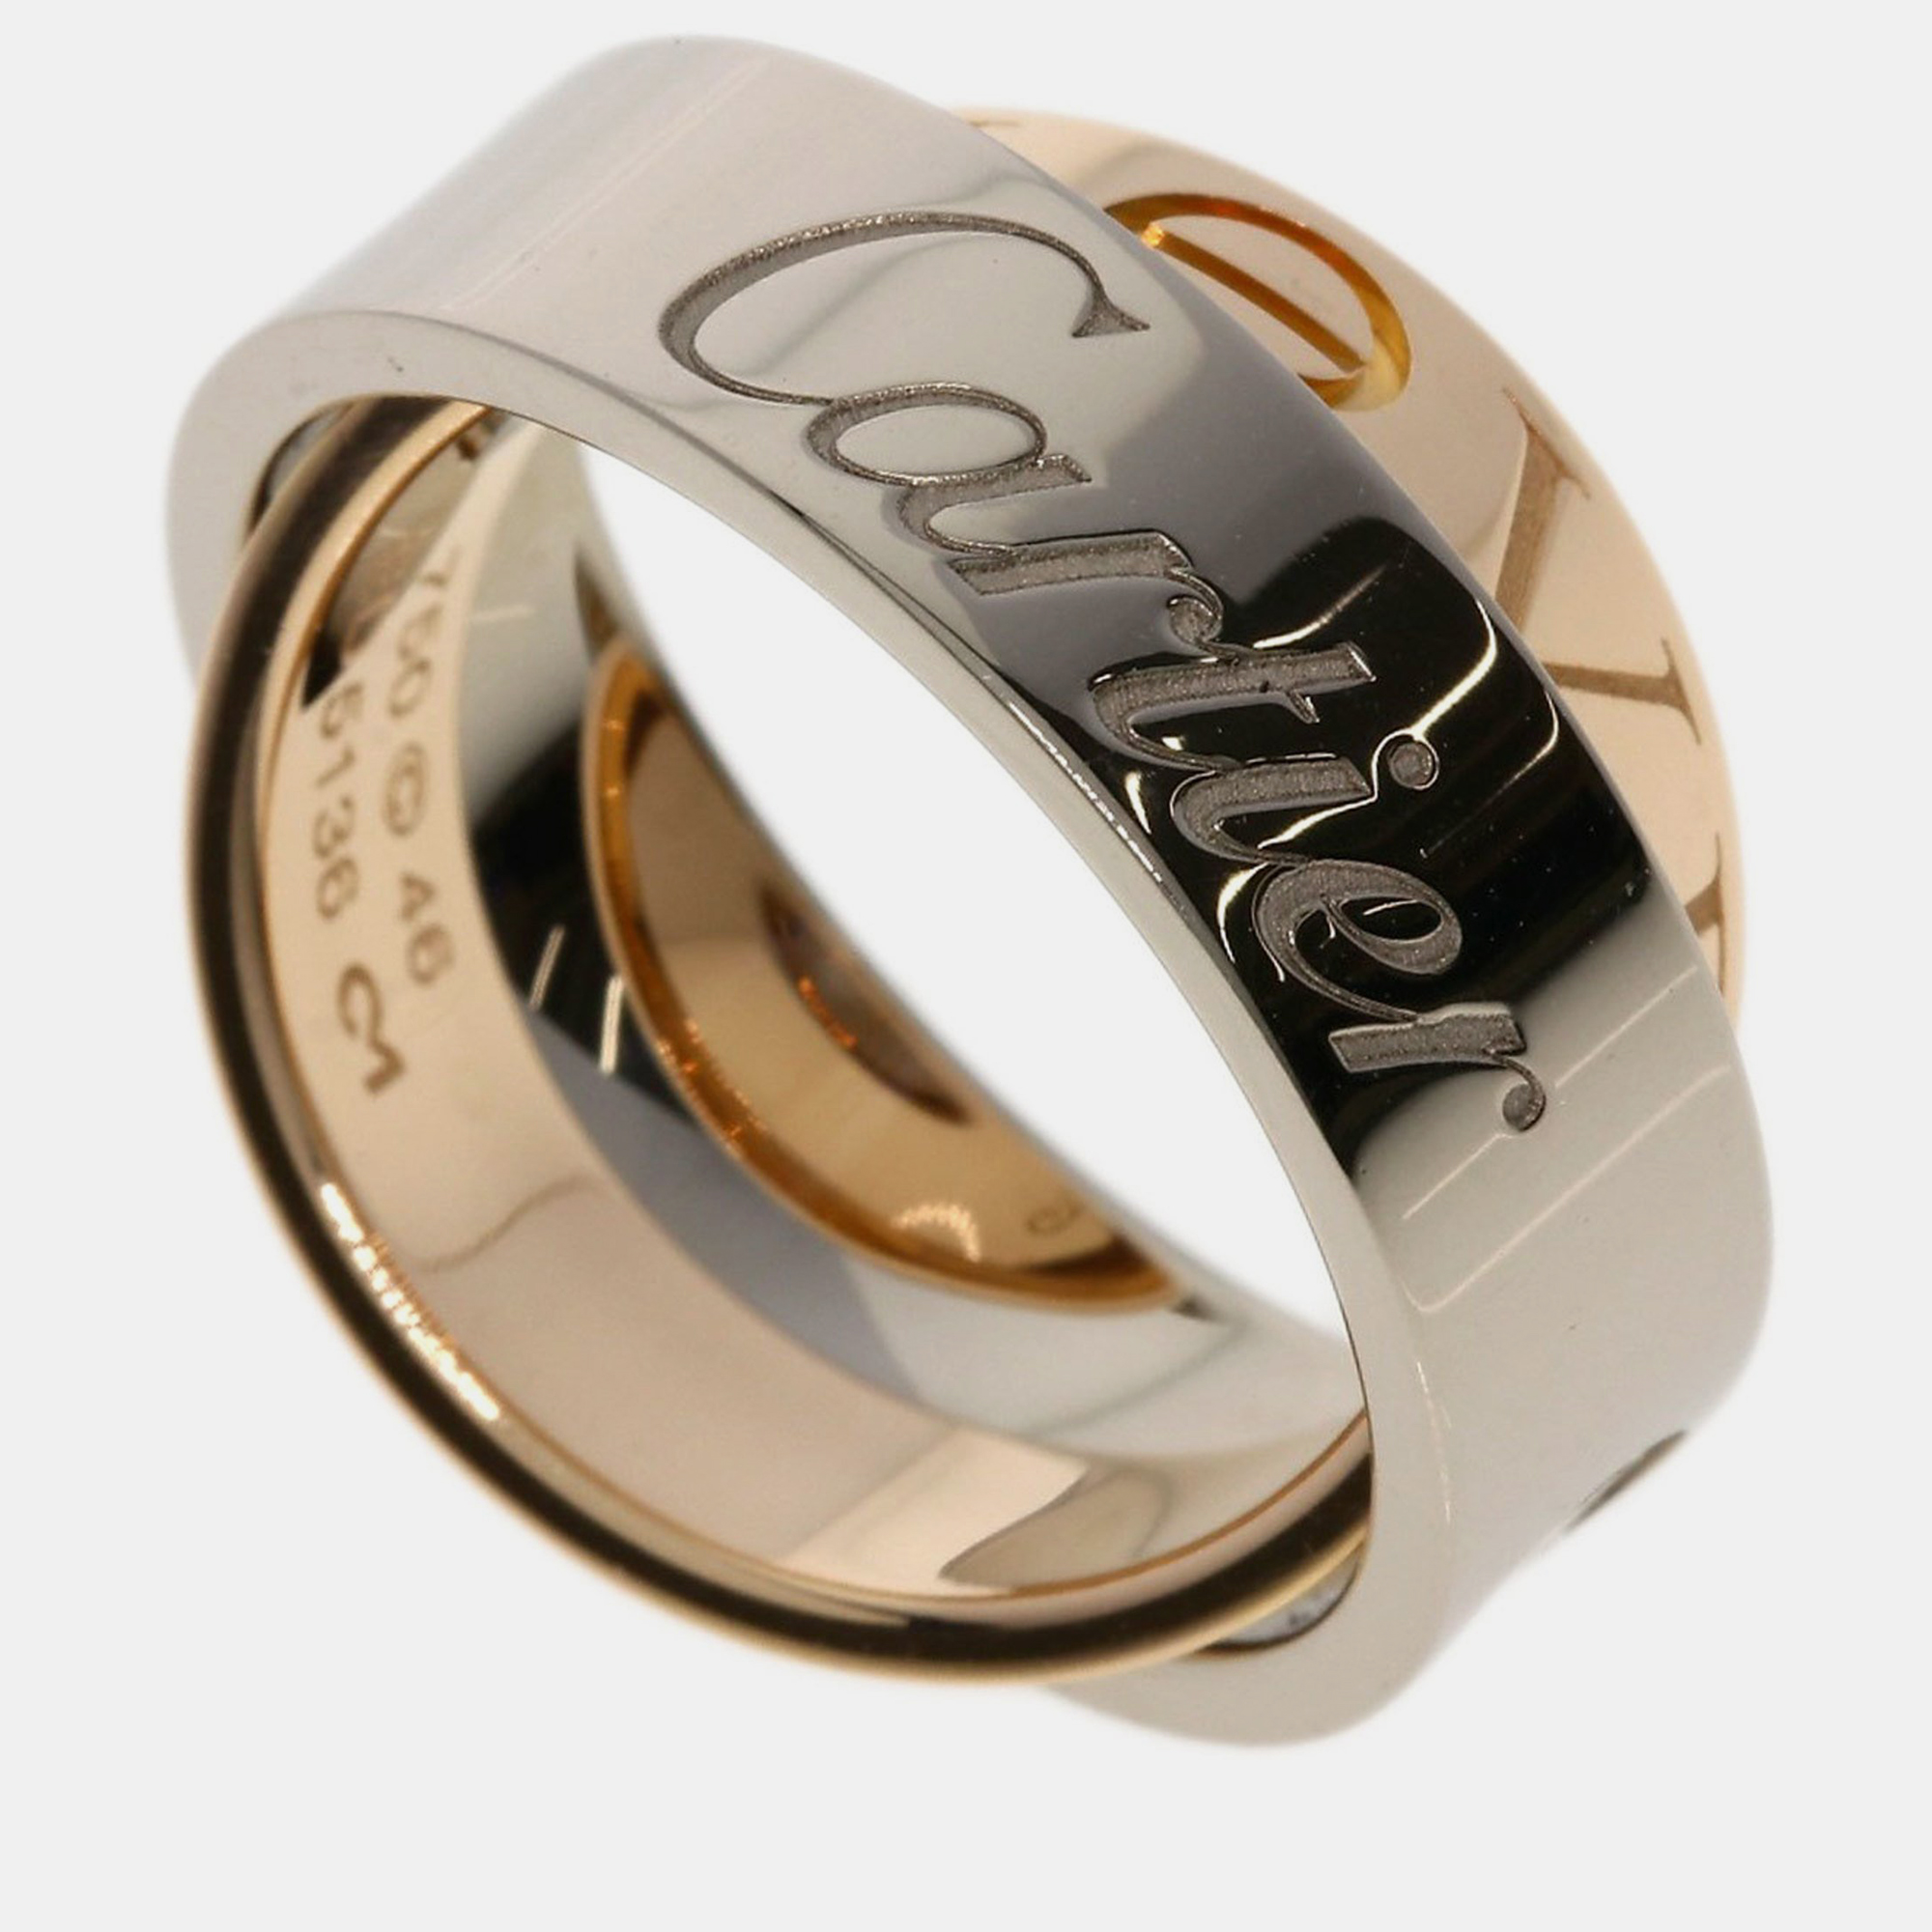 Cartier 18k rose and white gold astro love band ring eu 46